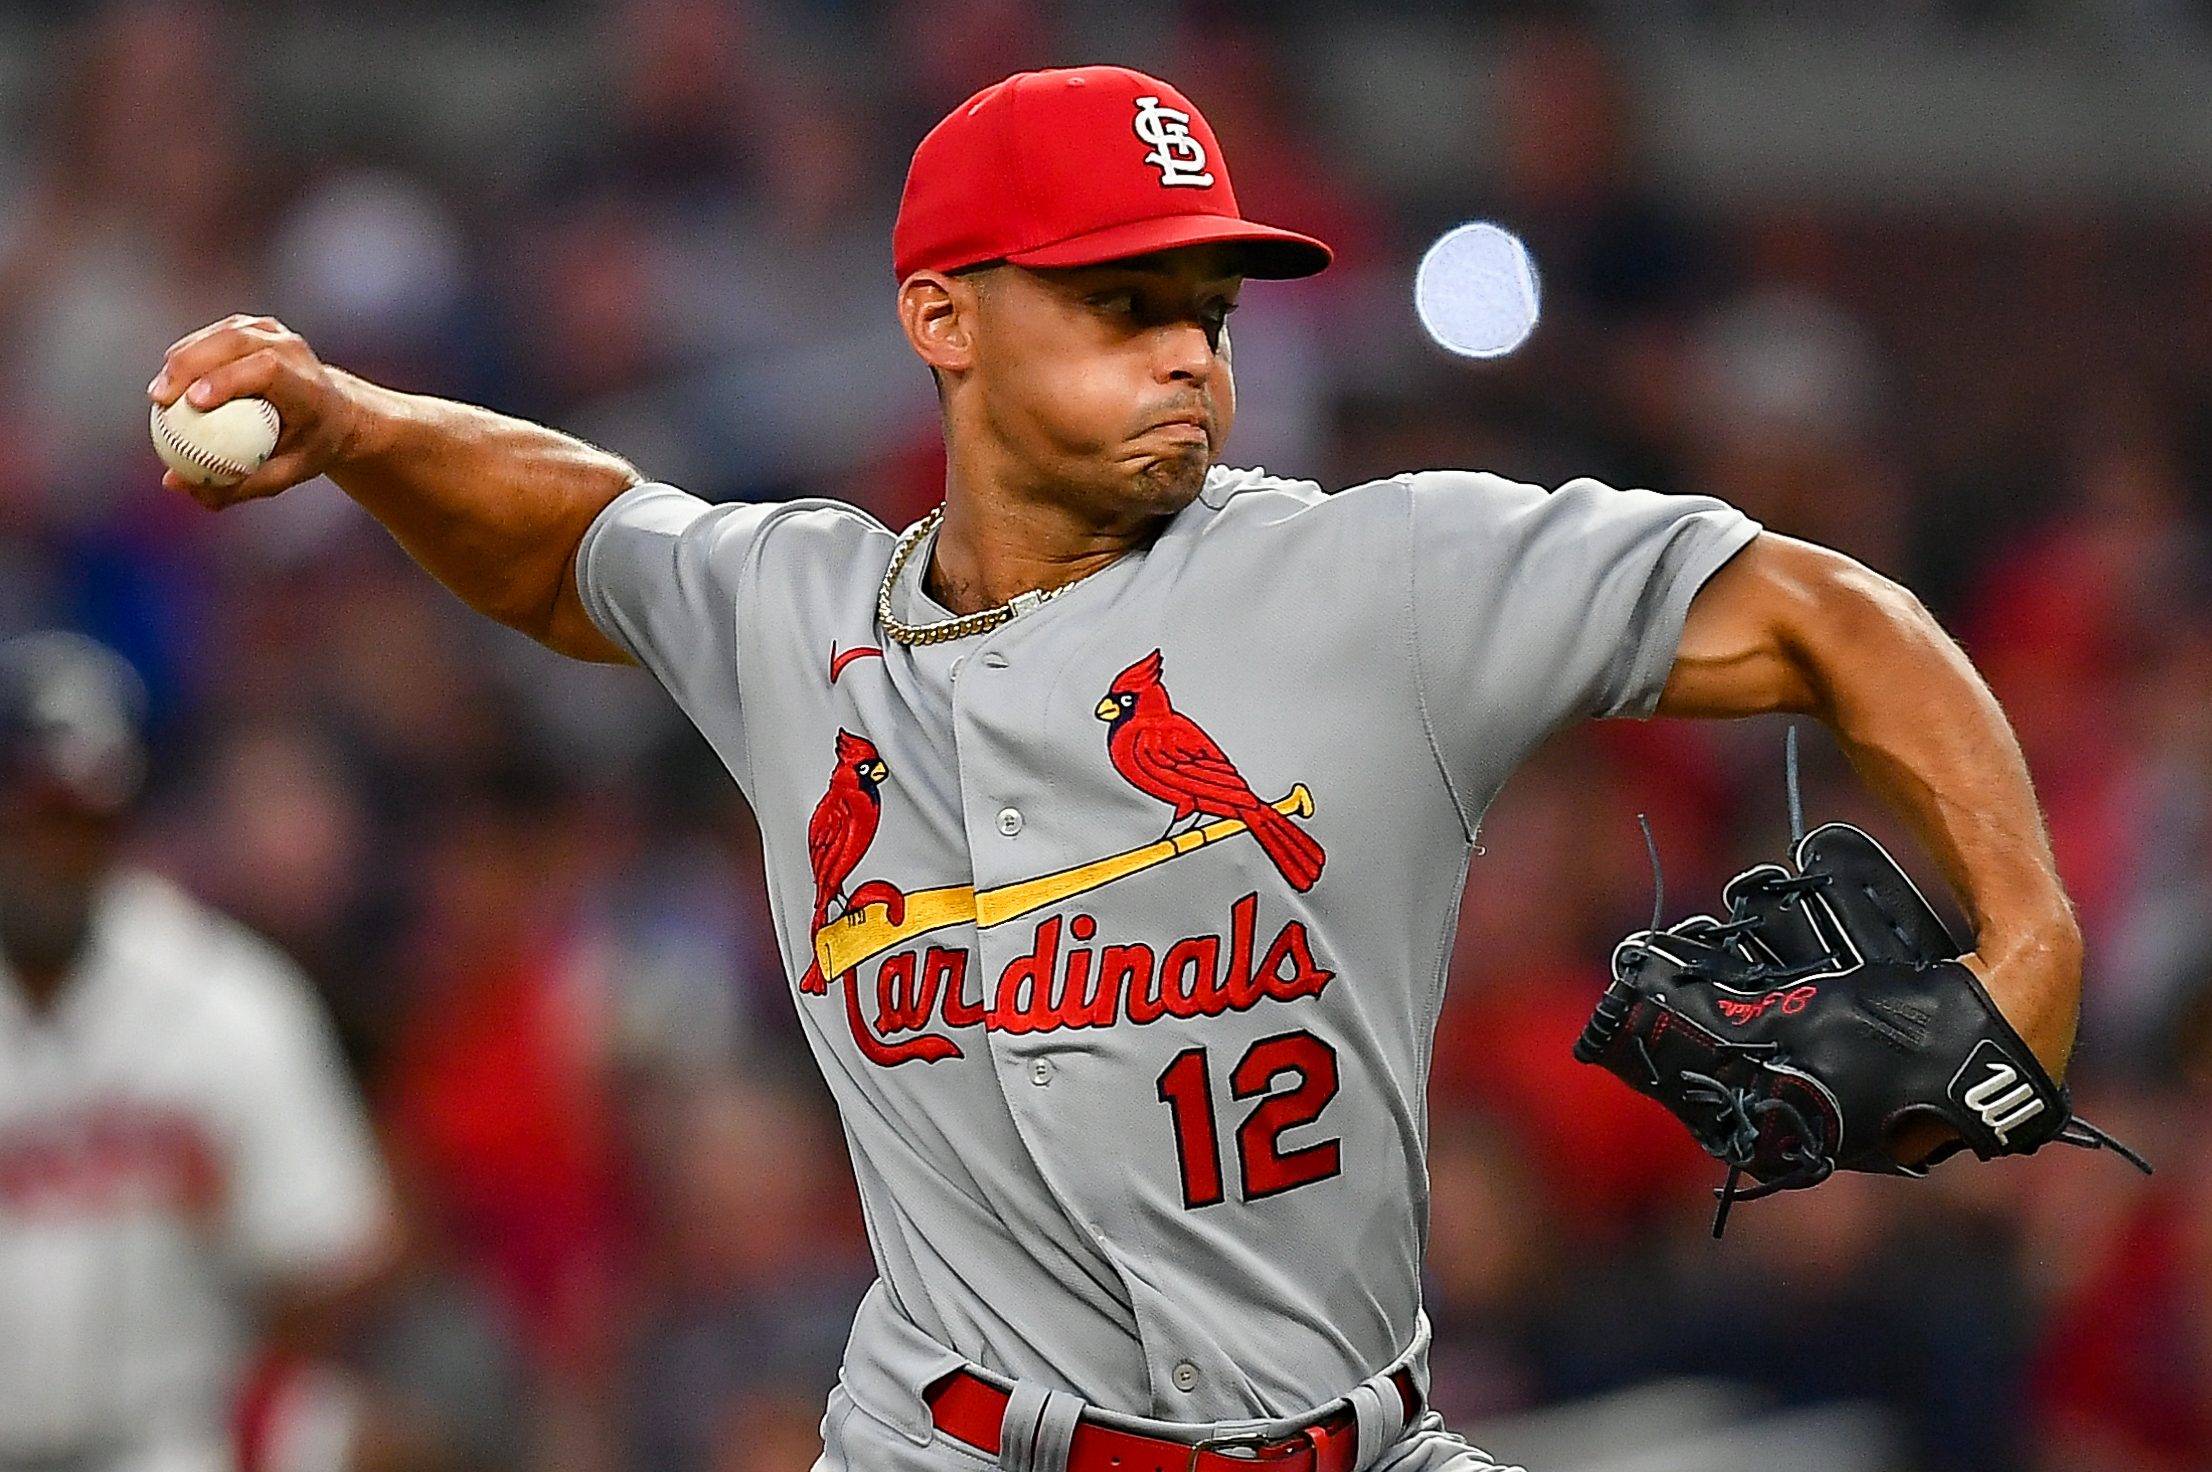 Watch Cardinals Reliever Jordan Hicks Throw MLB's Fastest Pitch in 2022